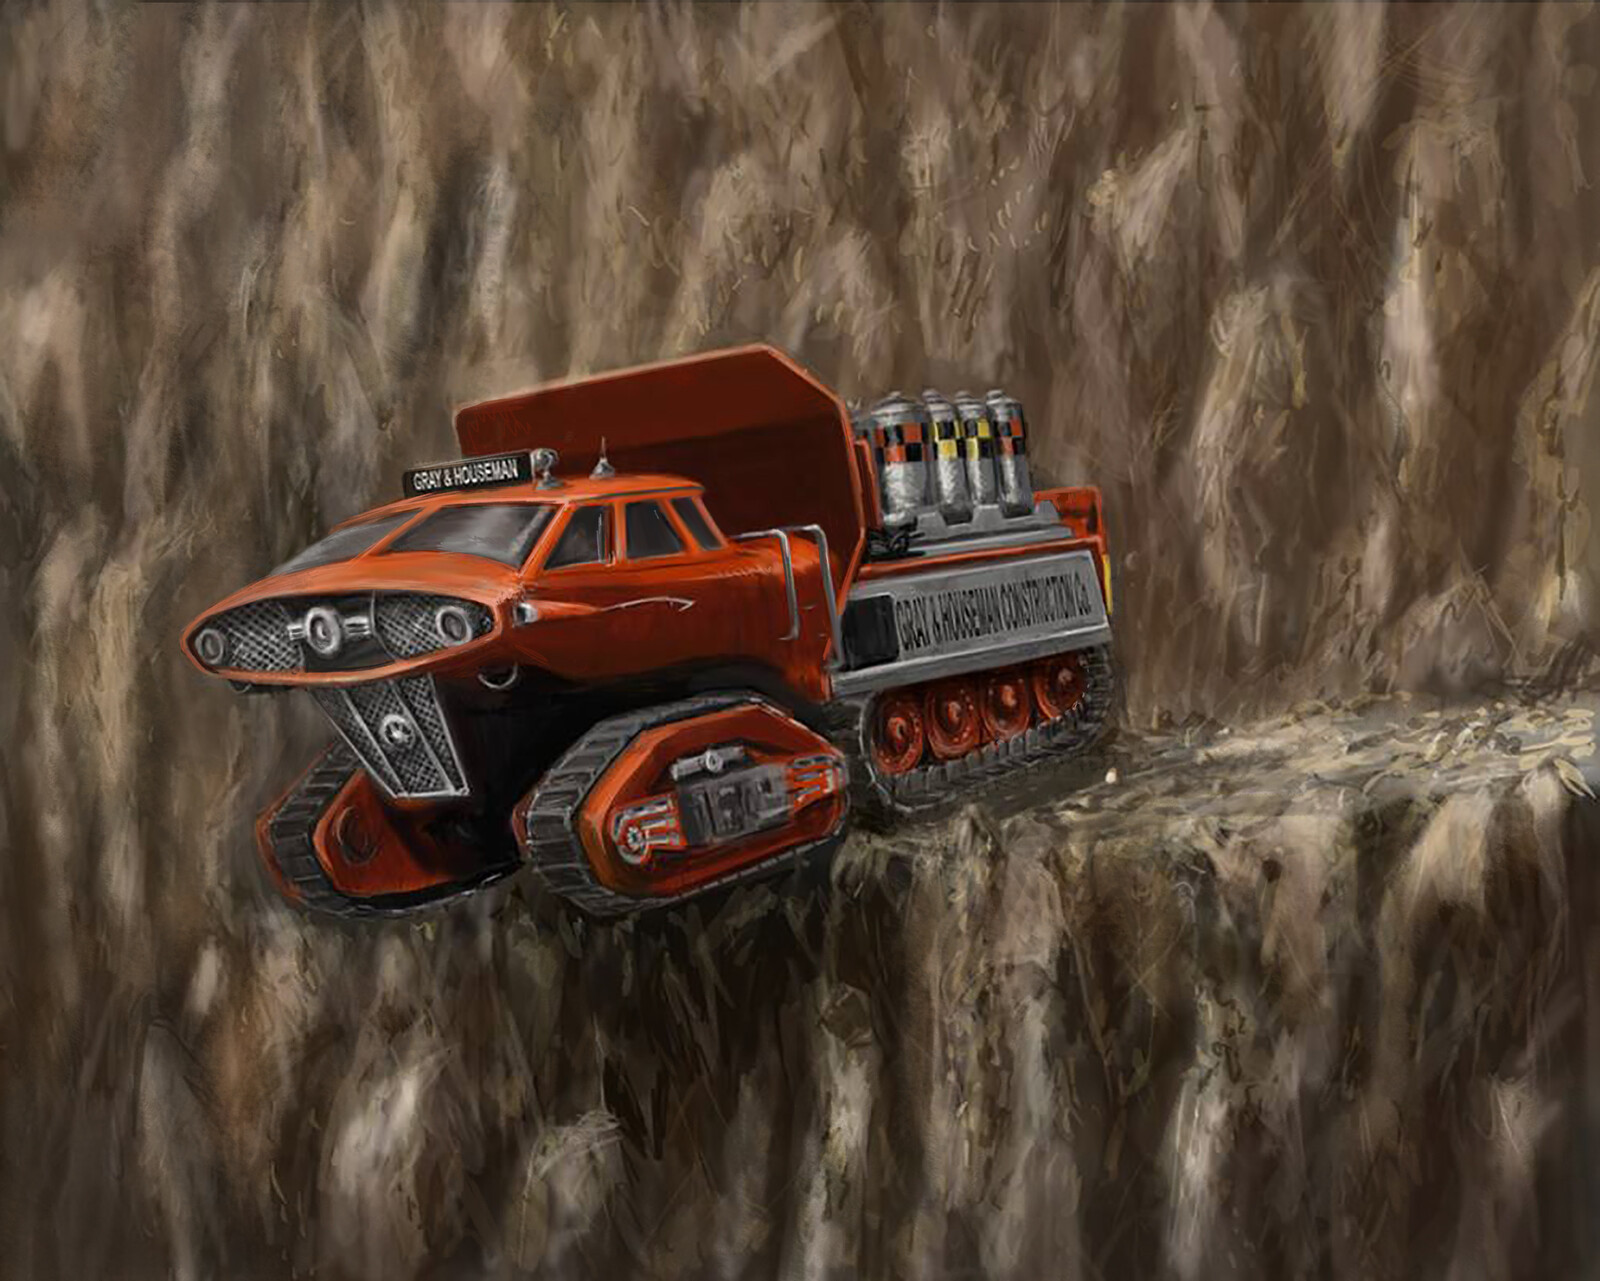 EXPLOSIVES TRACTOR
From the 'End of the Road' episode of 'Thunderbirds'. In an attempt to save his business, Eddie Houseman risked his life and became trapped in his vehicle, teetering on the edge of the cliff. Designed  by Mike Trim.